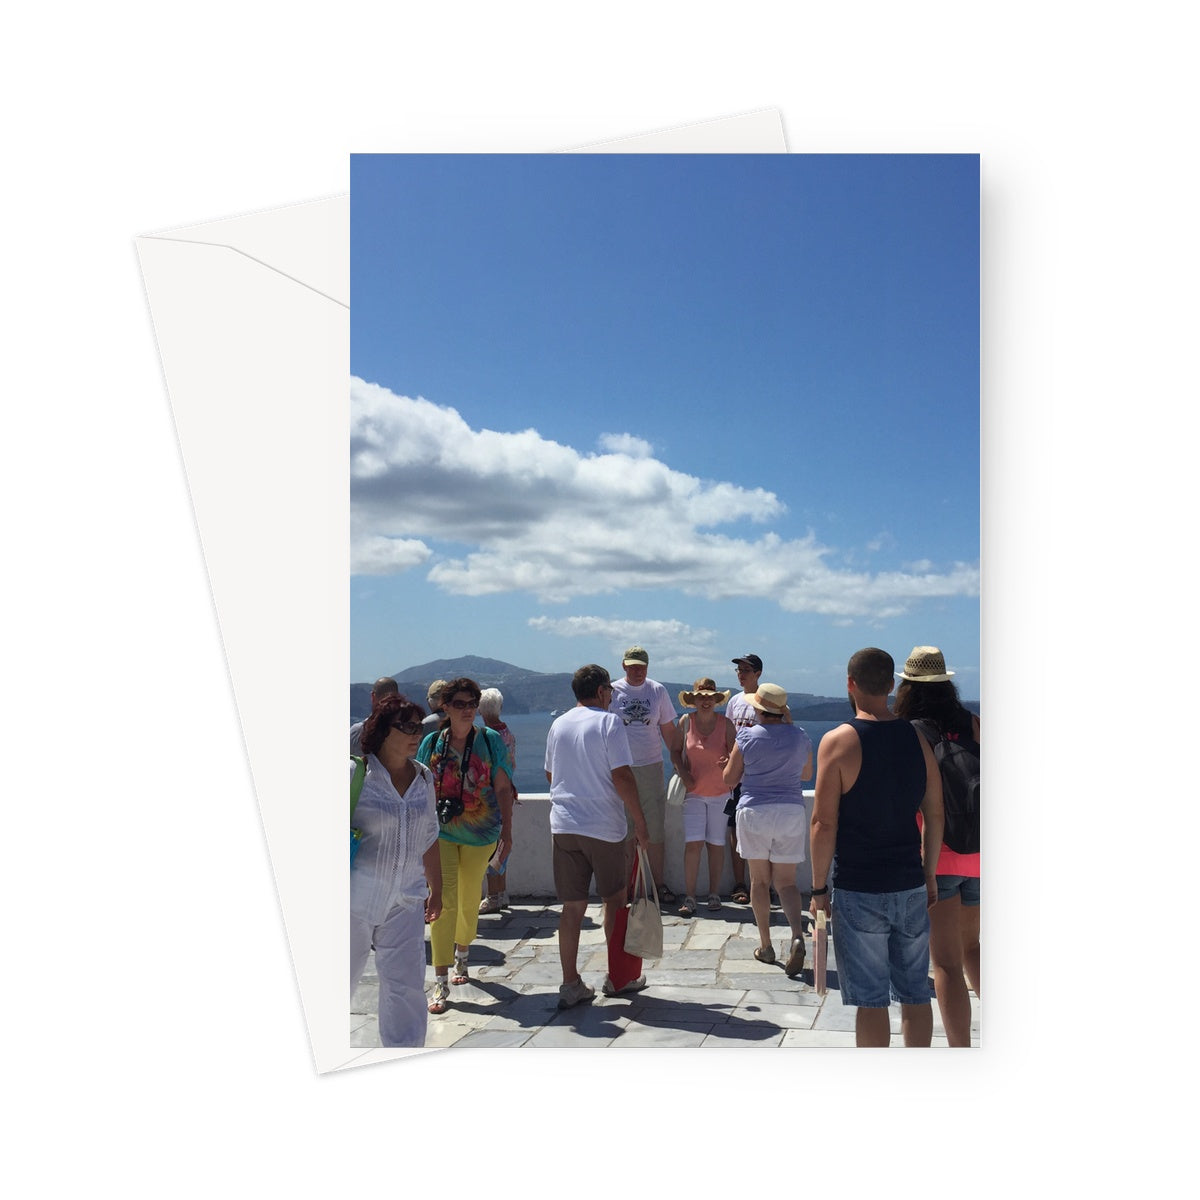 Tourists obscuring the view of the caledera off the coast of Santorni. Large sky in the top half of this greeting card